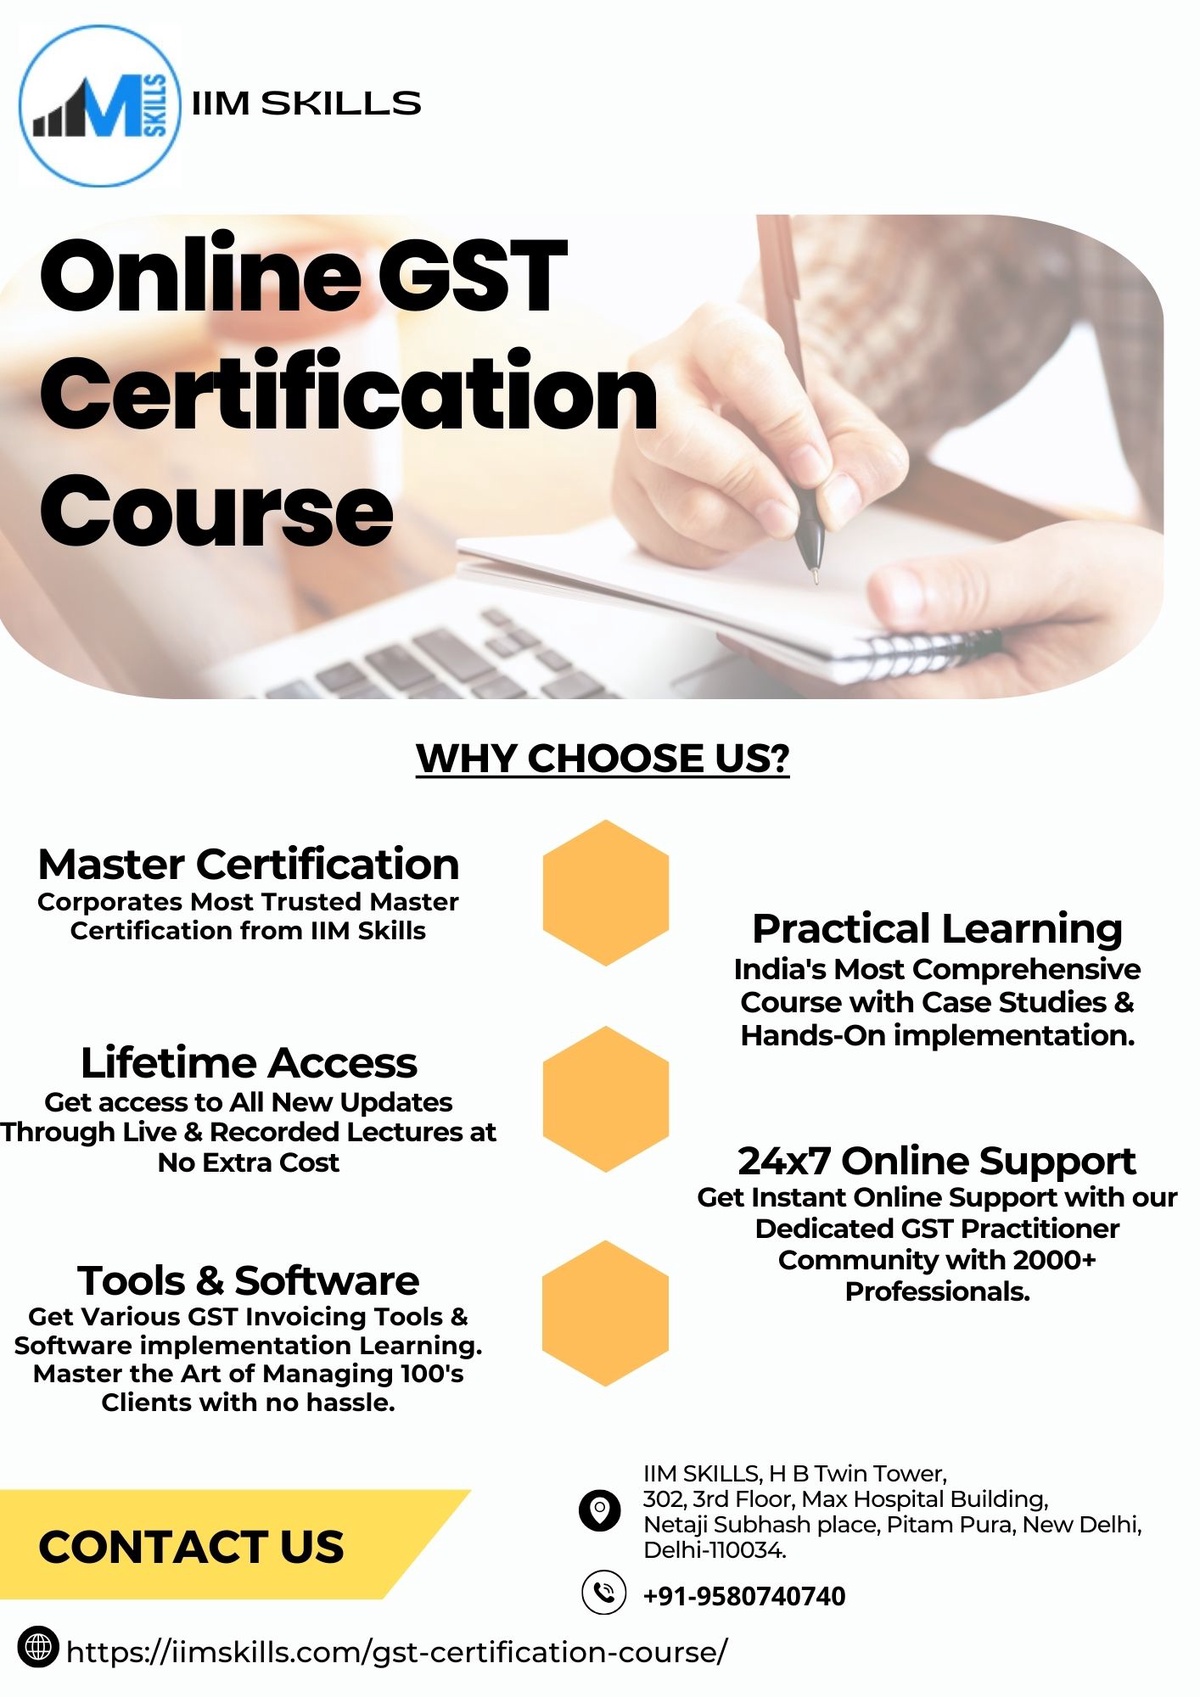 Unlock Your Future with Our Online GST Course!